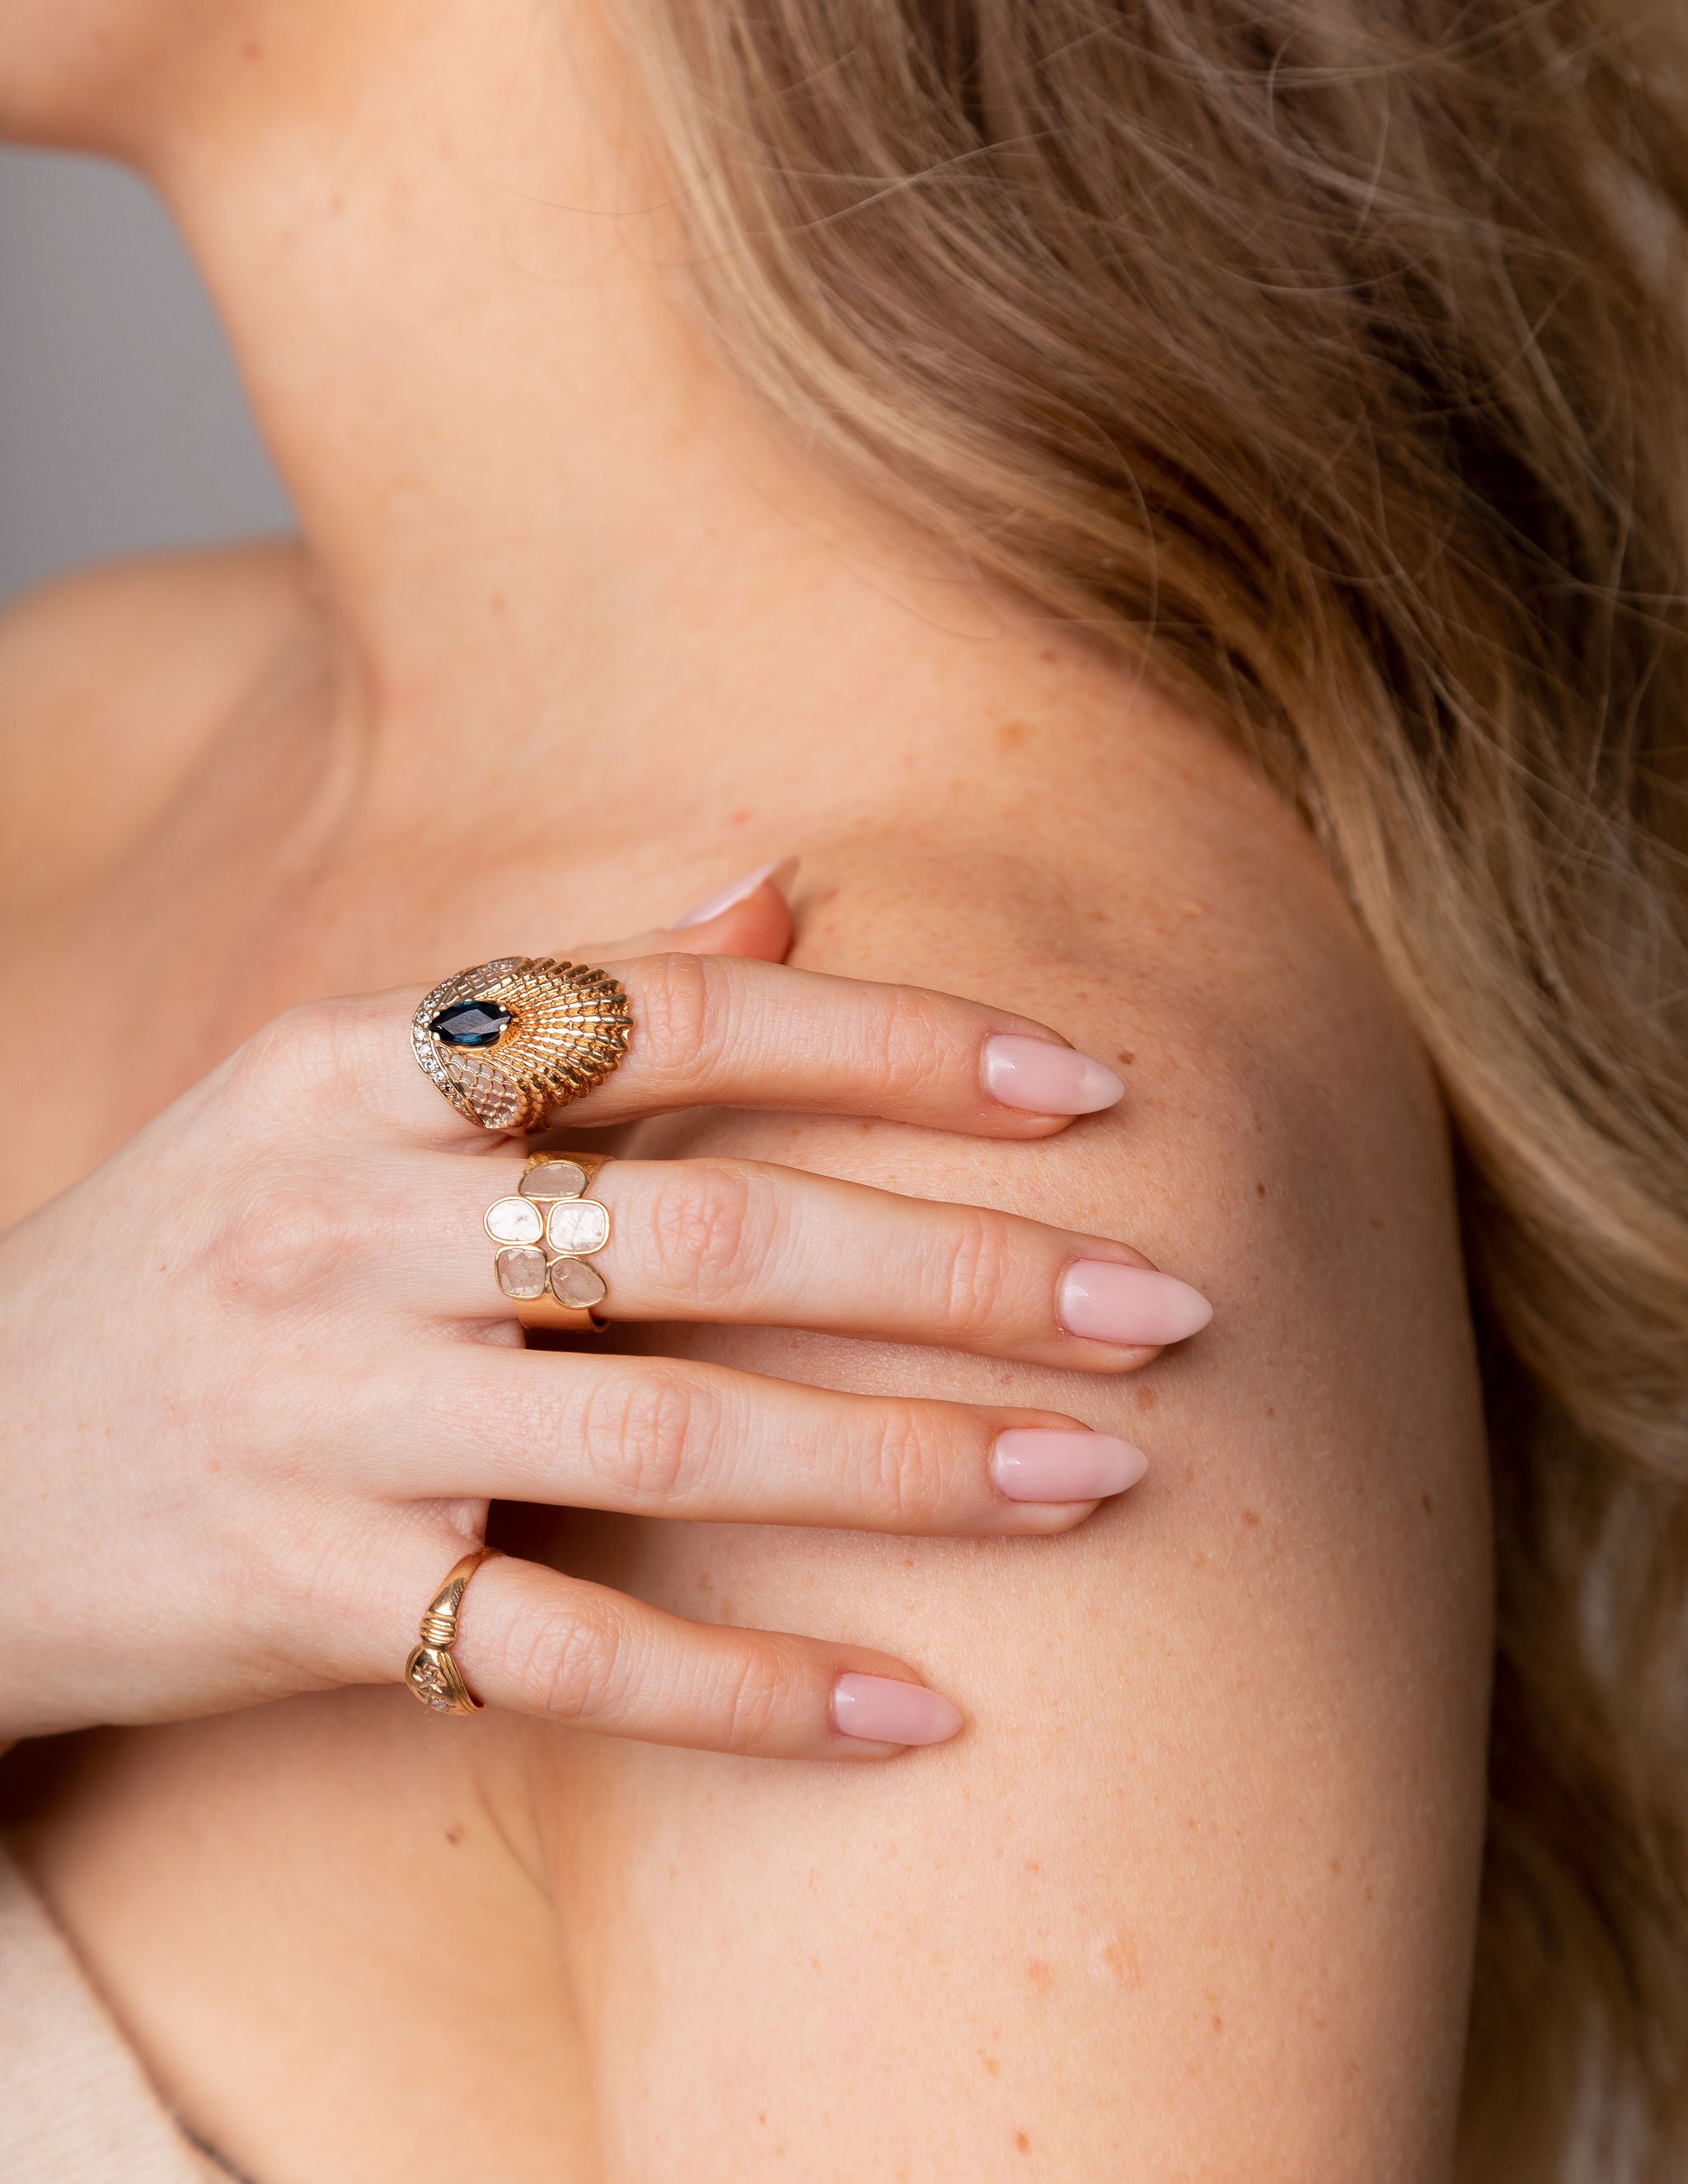 The Ultimate Guide to Taking Care of Your Gold Jewelry